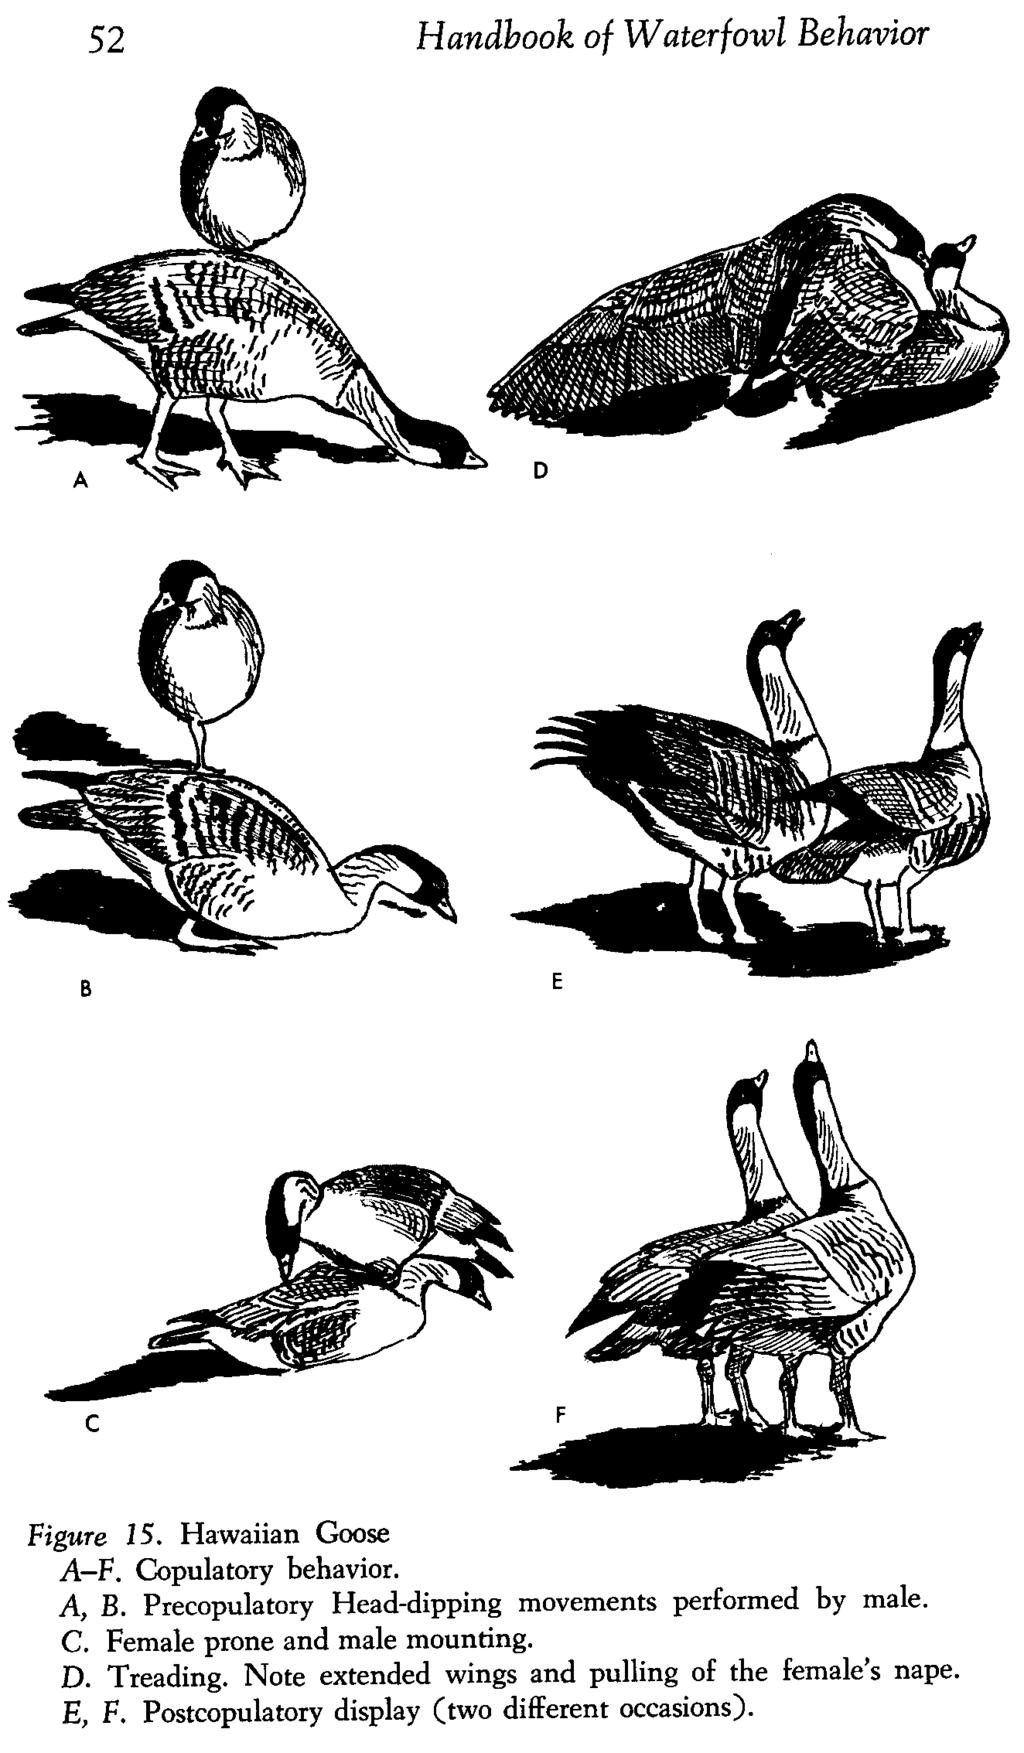 52 Handbook of Waterfowl Behavior Figure IS. Hawaiian Goose A-F. Copulatory behavior. A, B. Precopulatory Head-dipping movements performed by male. C. Female prone and male mounting.